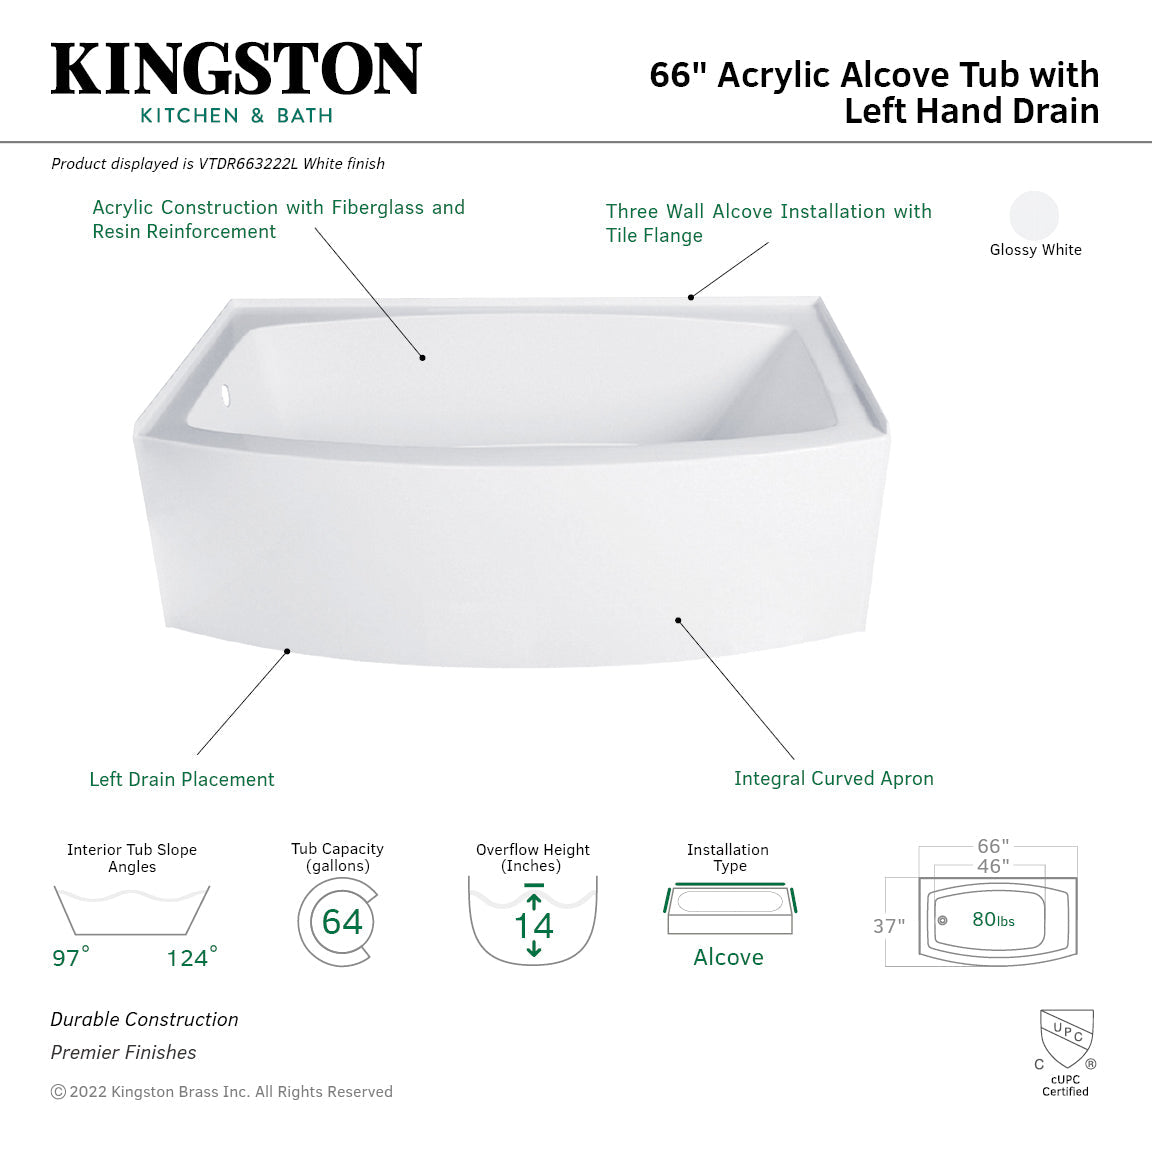 Aqua Eden VTDR663222L 66-Inch Acrylic Curved Apron 3-Wall Alcove Tub with Left Hand Drain, Glossy White